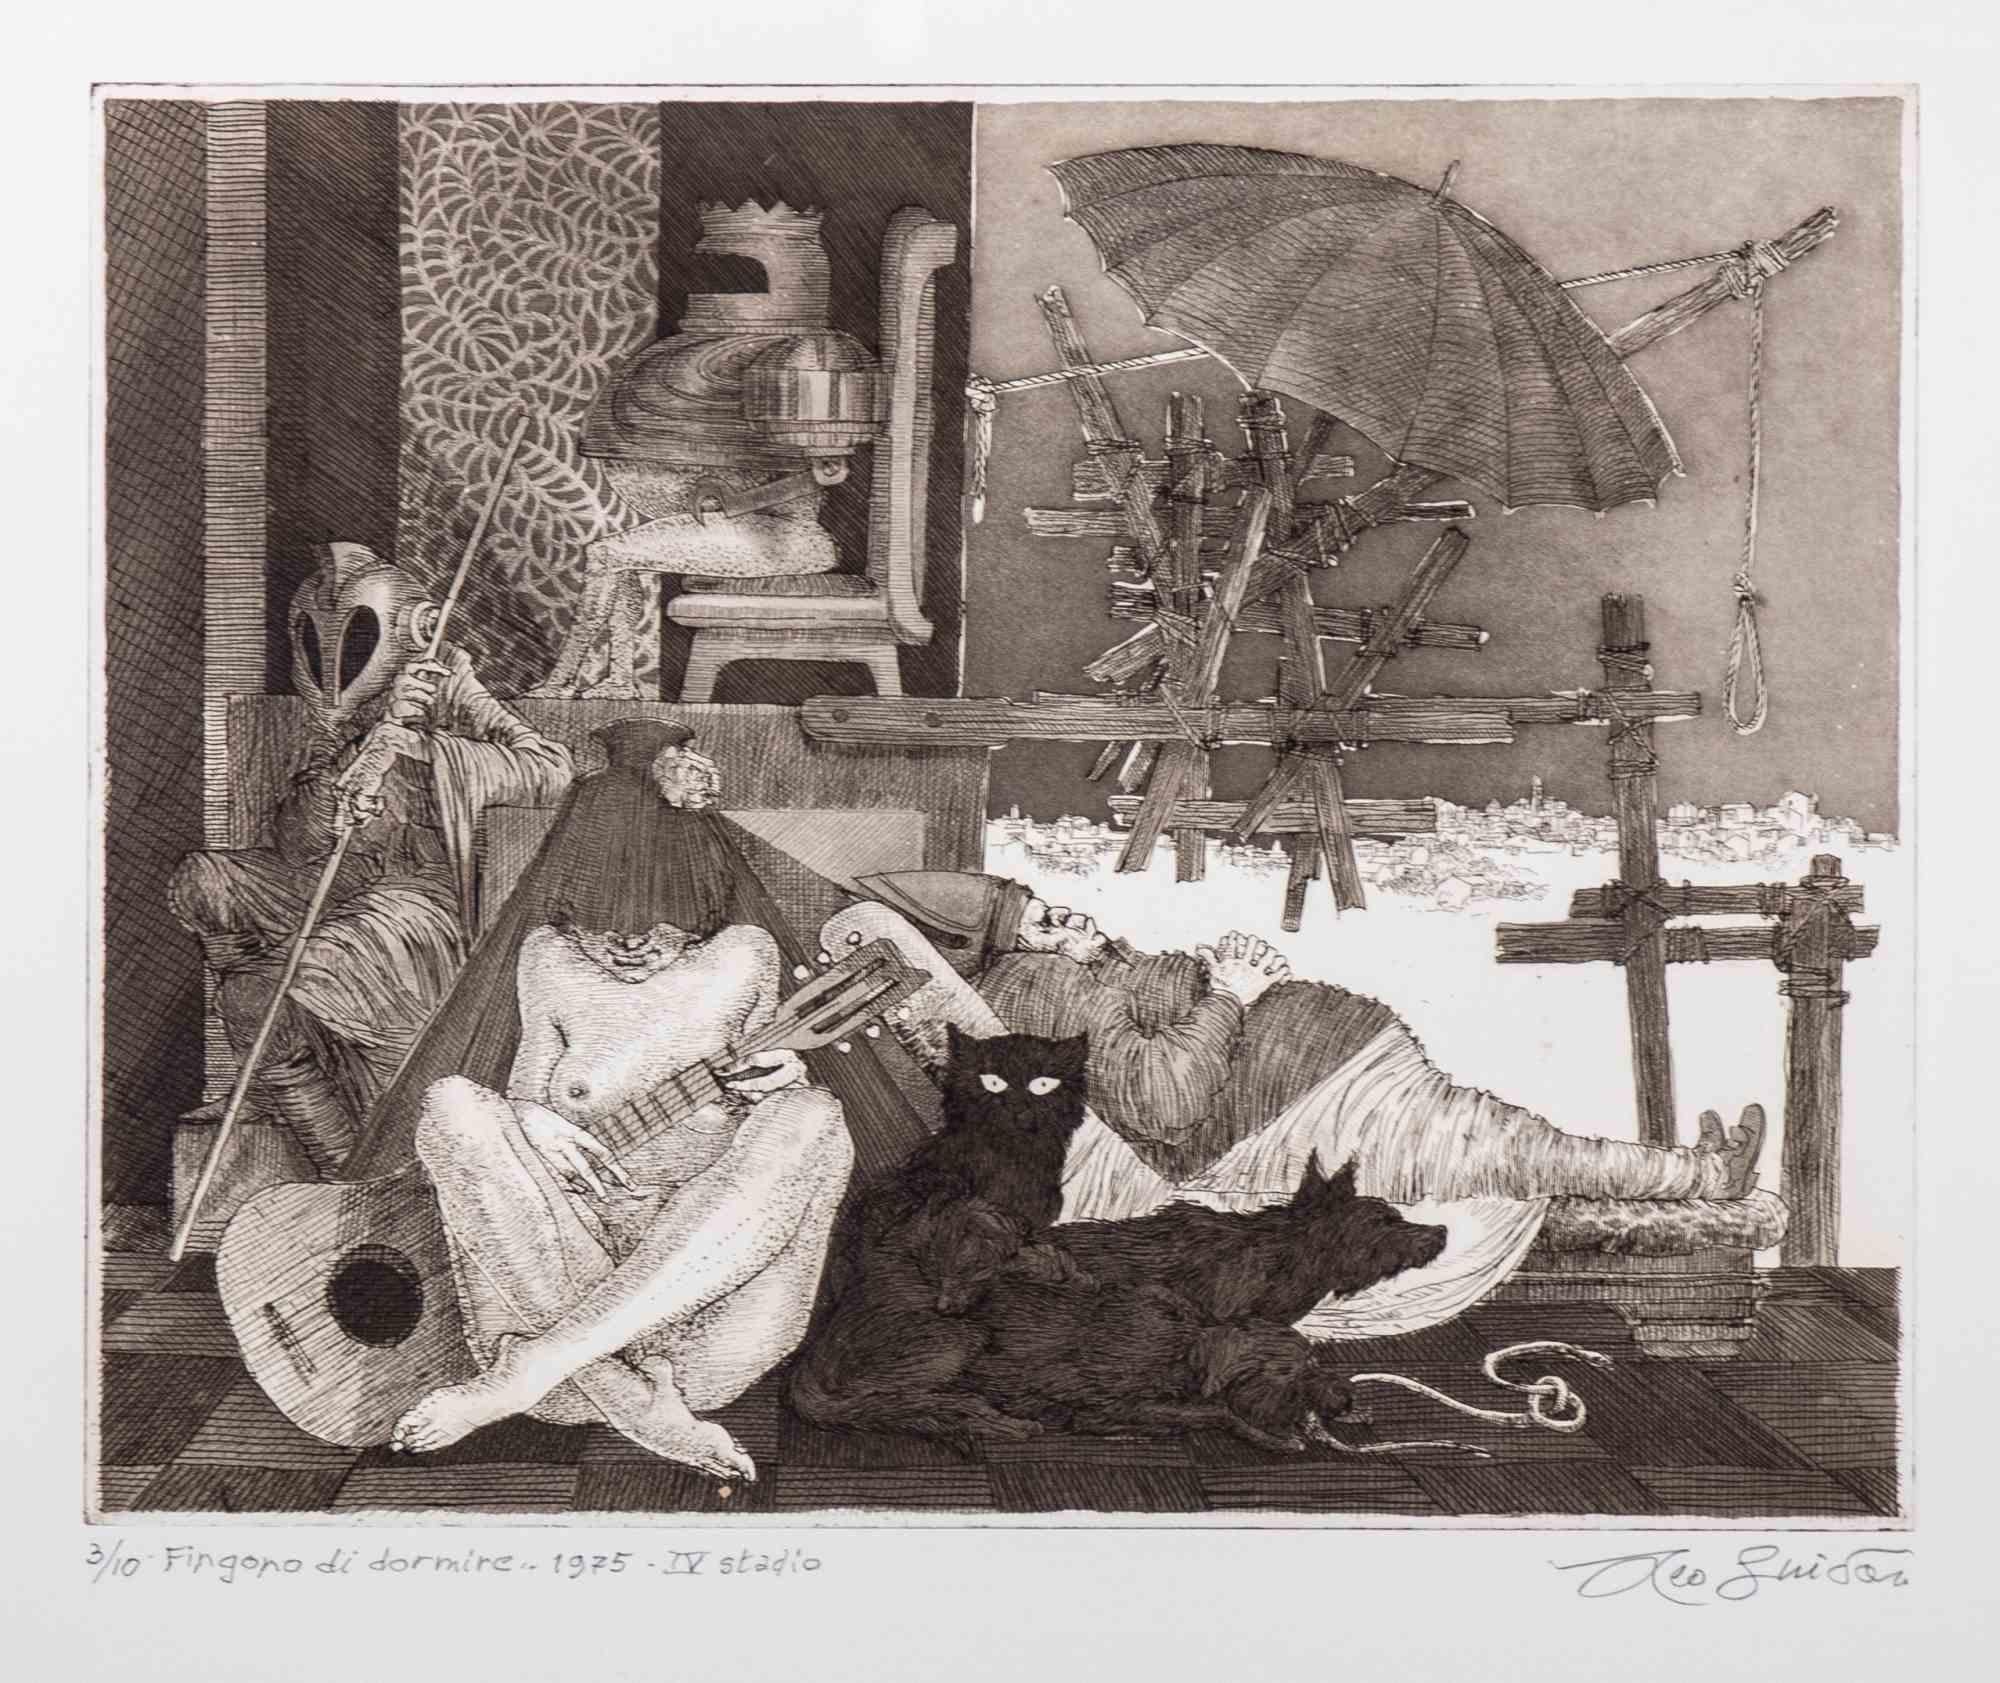 They pretend to sleep is a contemporary artwork realized by Leo Guida in 1975

Black and white etching.

Hand signed, dated, and titled on the lower margin.

Original title: Fingono di dormire

Edition 3/10 IV stadio

Includes frame

Leo Guida 